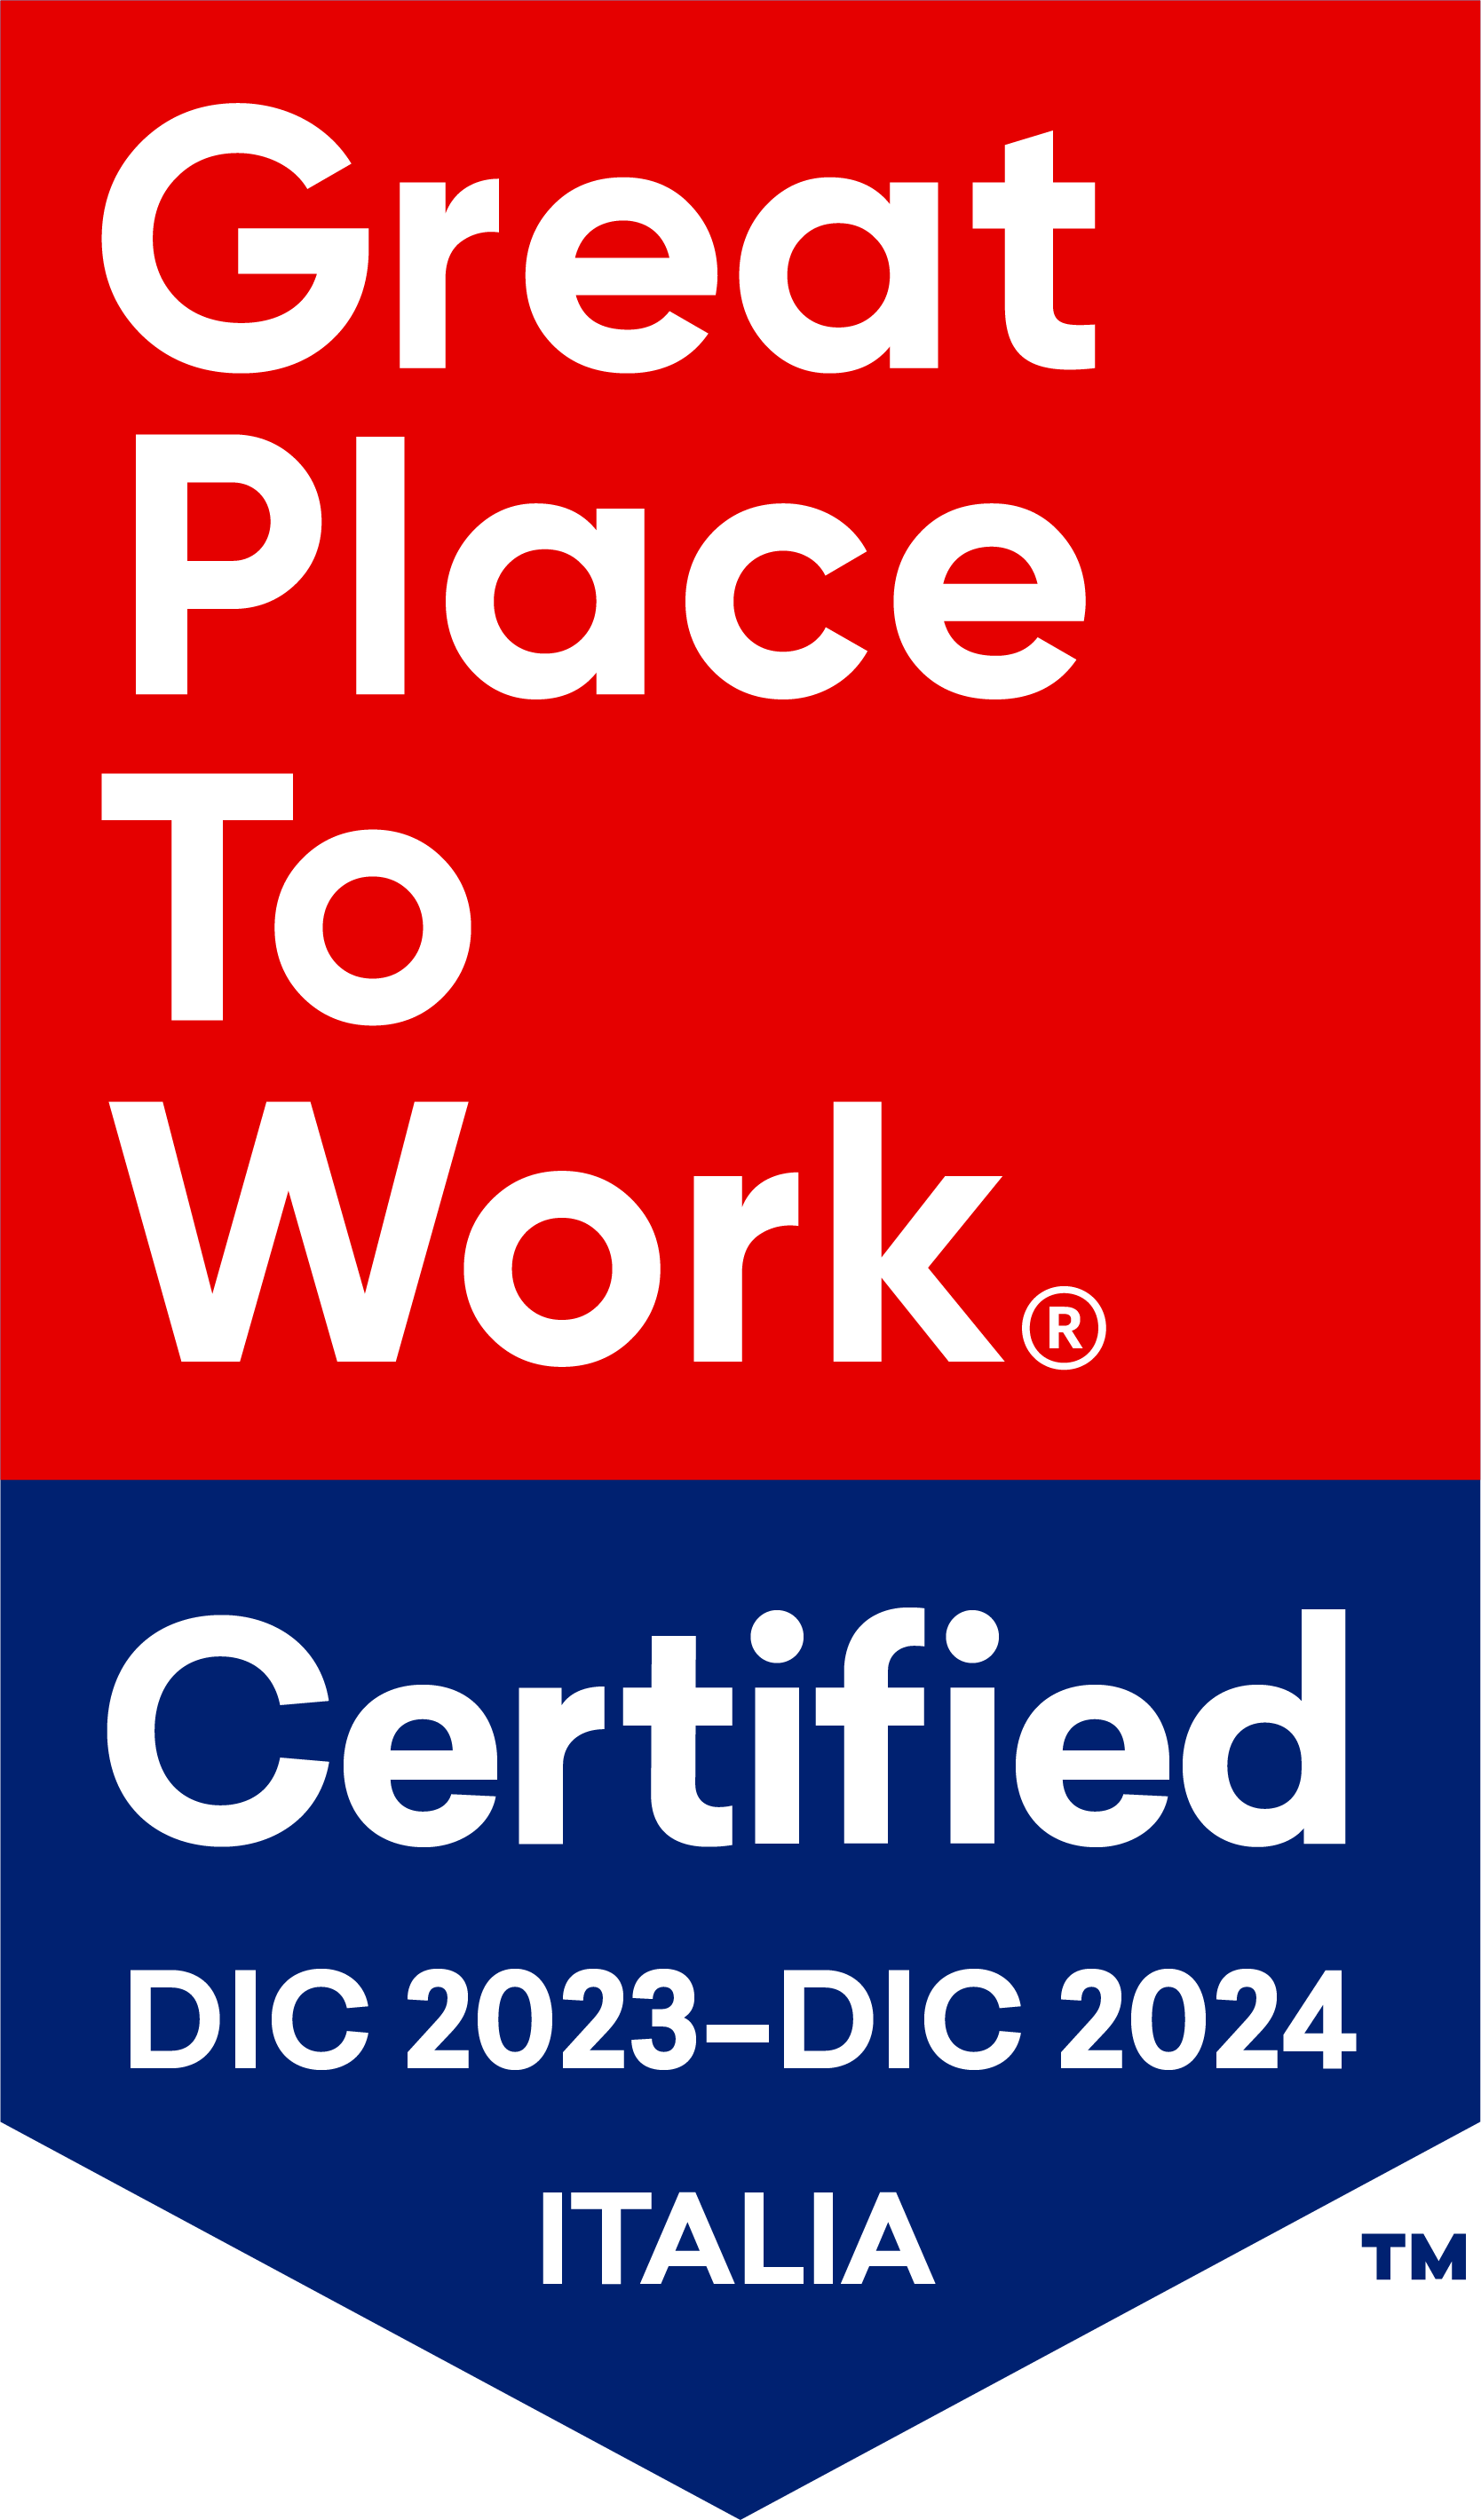 Certified - Great place to work